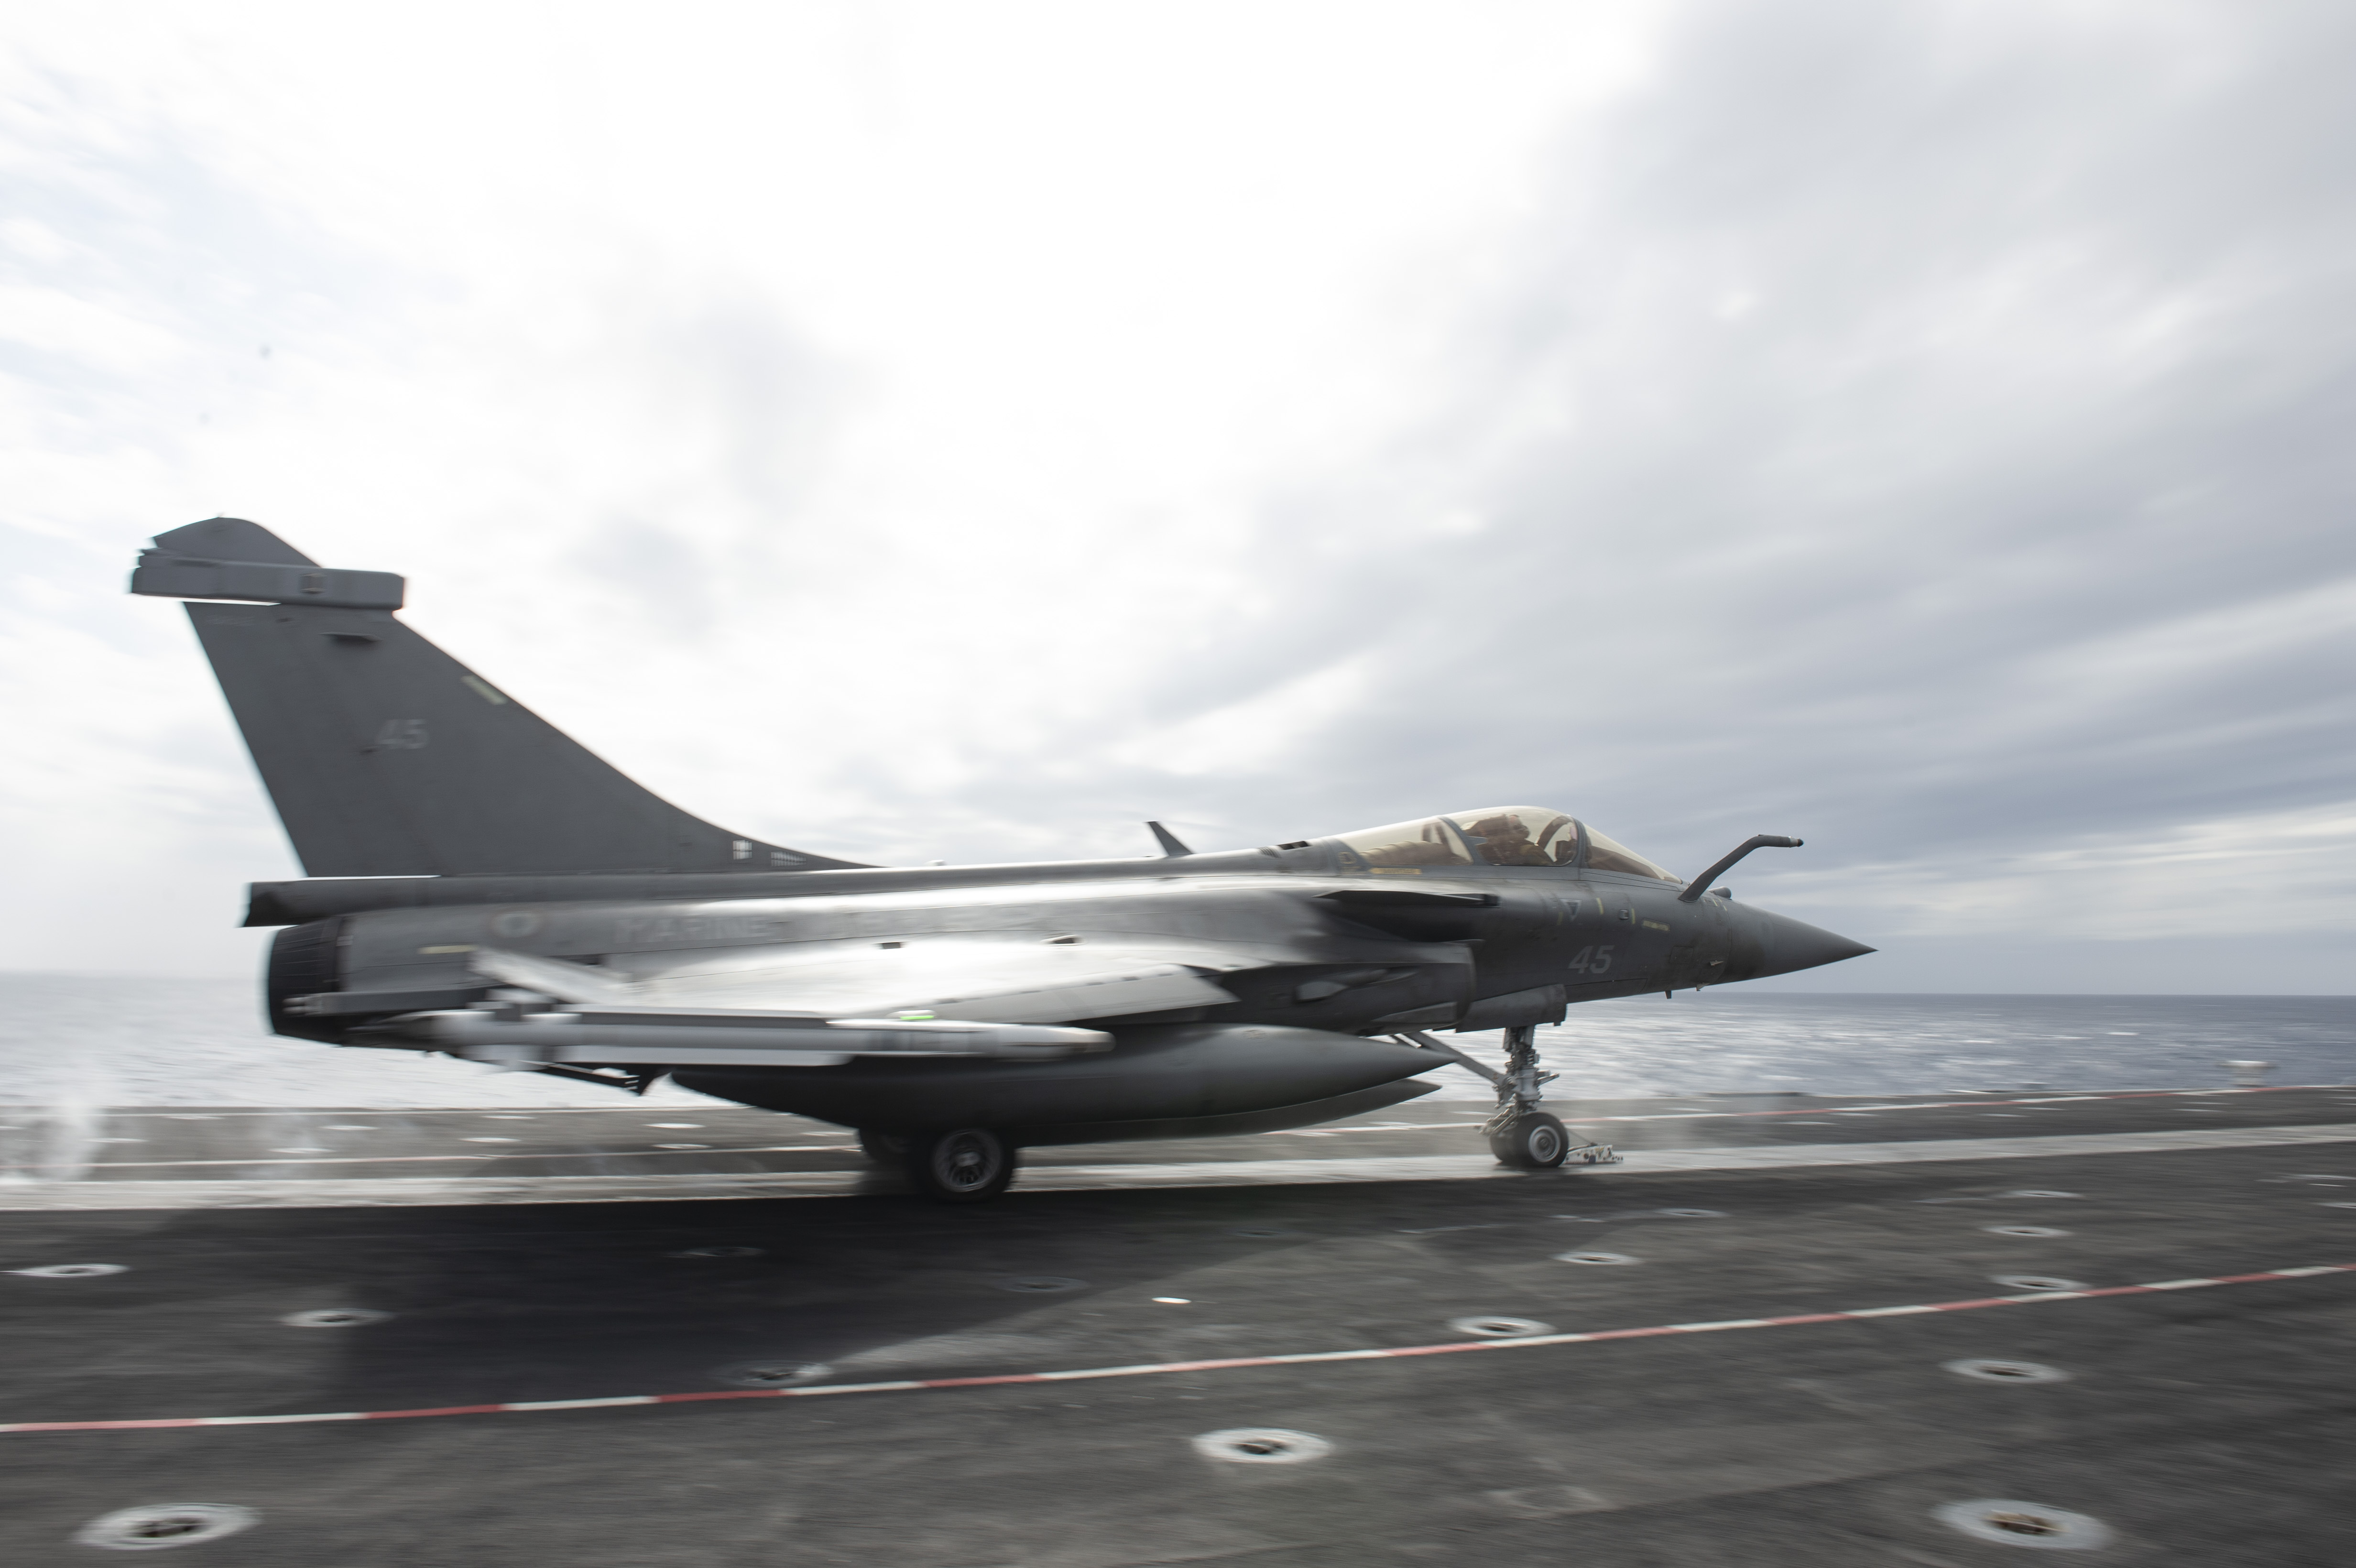 French Dassault Rafale M fighter jet launches from the flight deck aboard the French aircraft carrier Charles De Gaulle (R 91) while conducting interoperability exercises with the aircraft carrier USS Dwight D. Eisenhower (CVN 69).